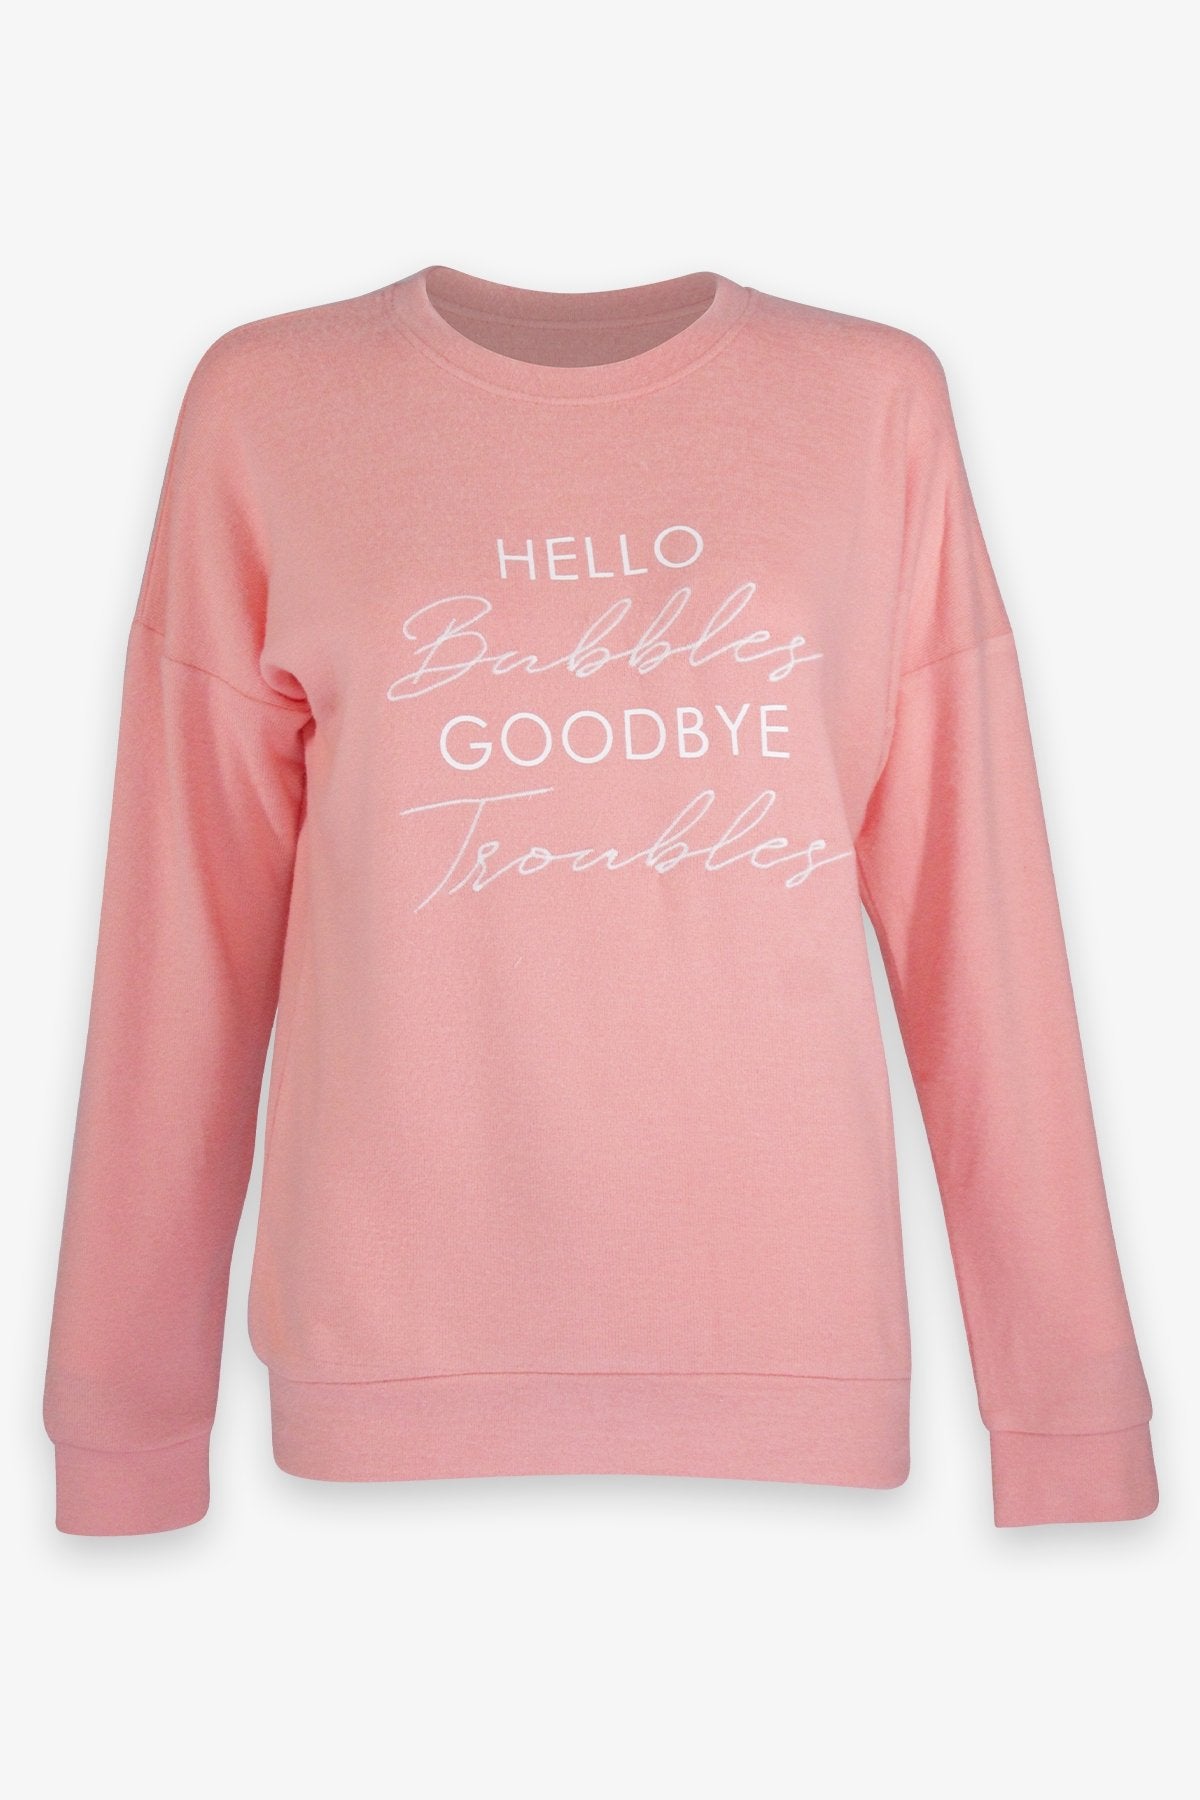 Bubbles-Troubles Long Sleeve Top in Light Coral - shop-olivia.com